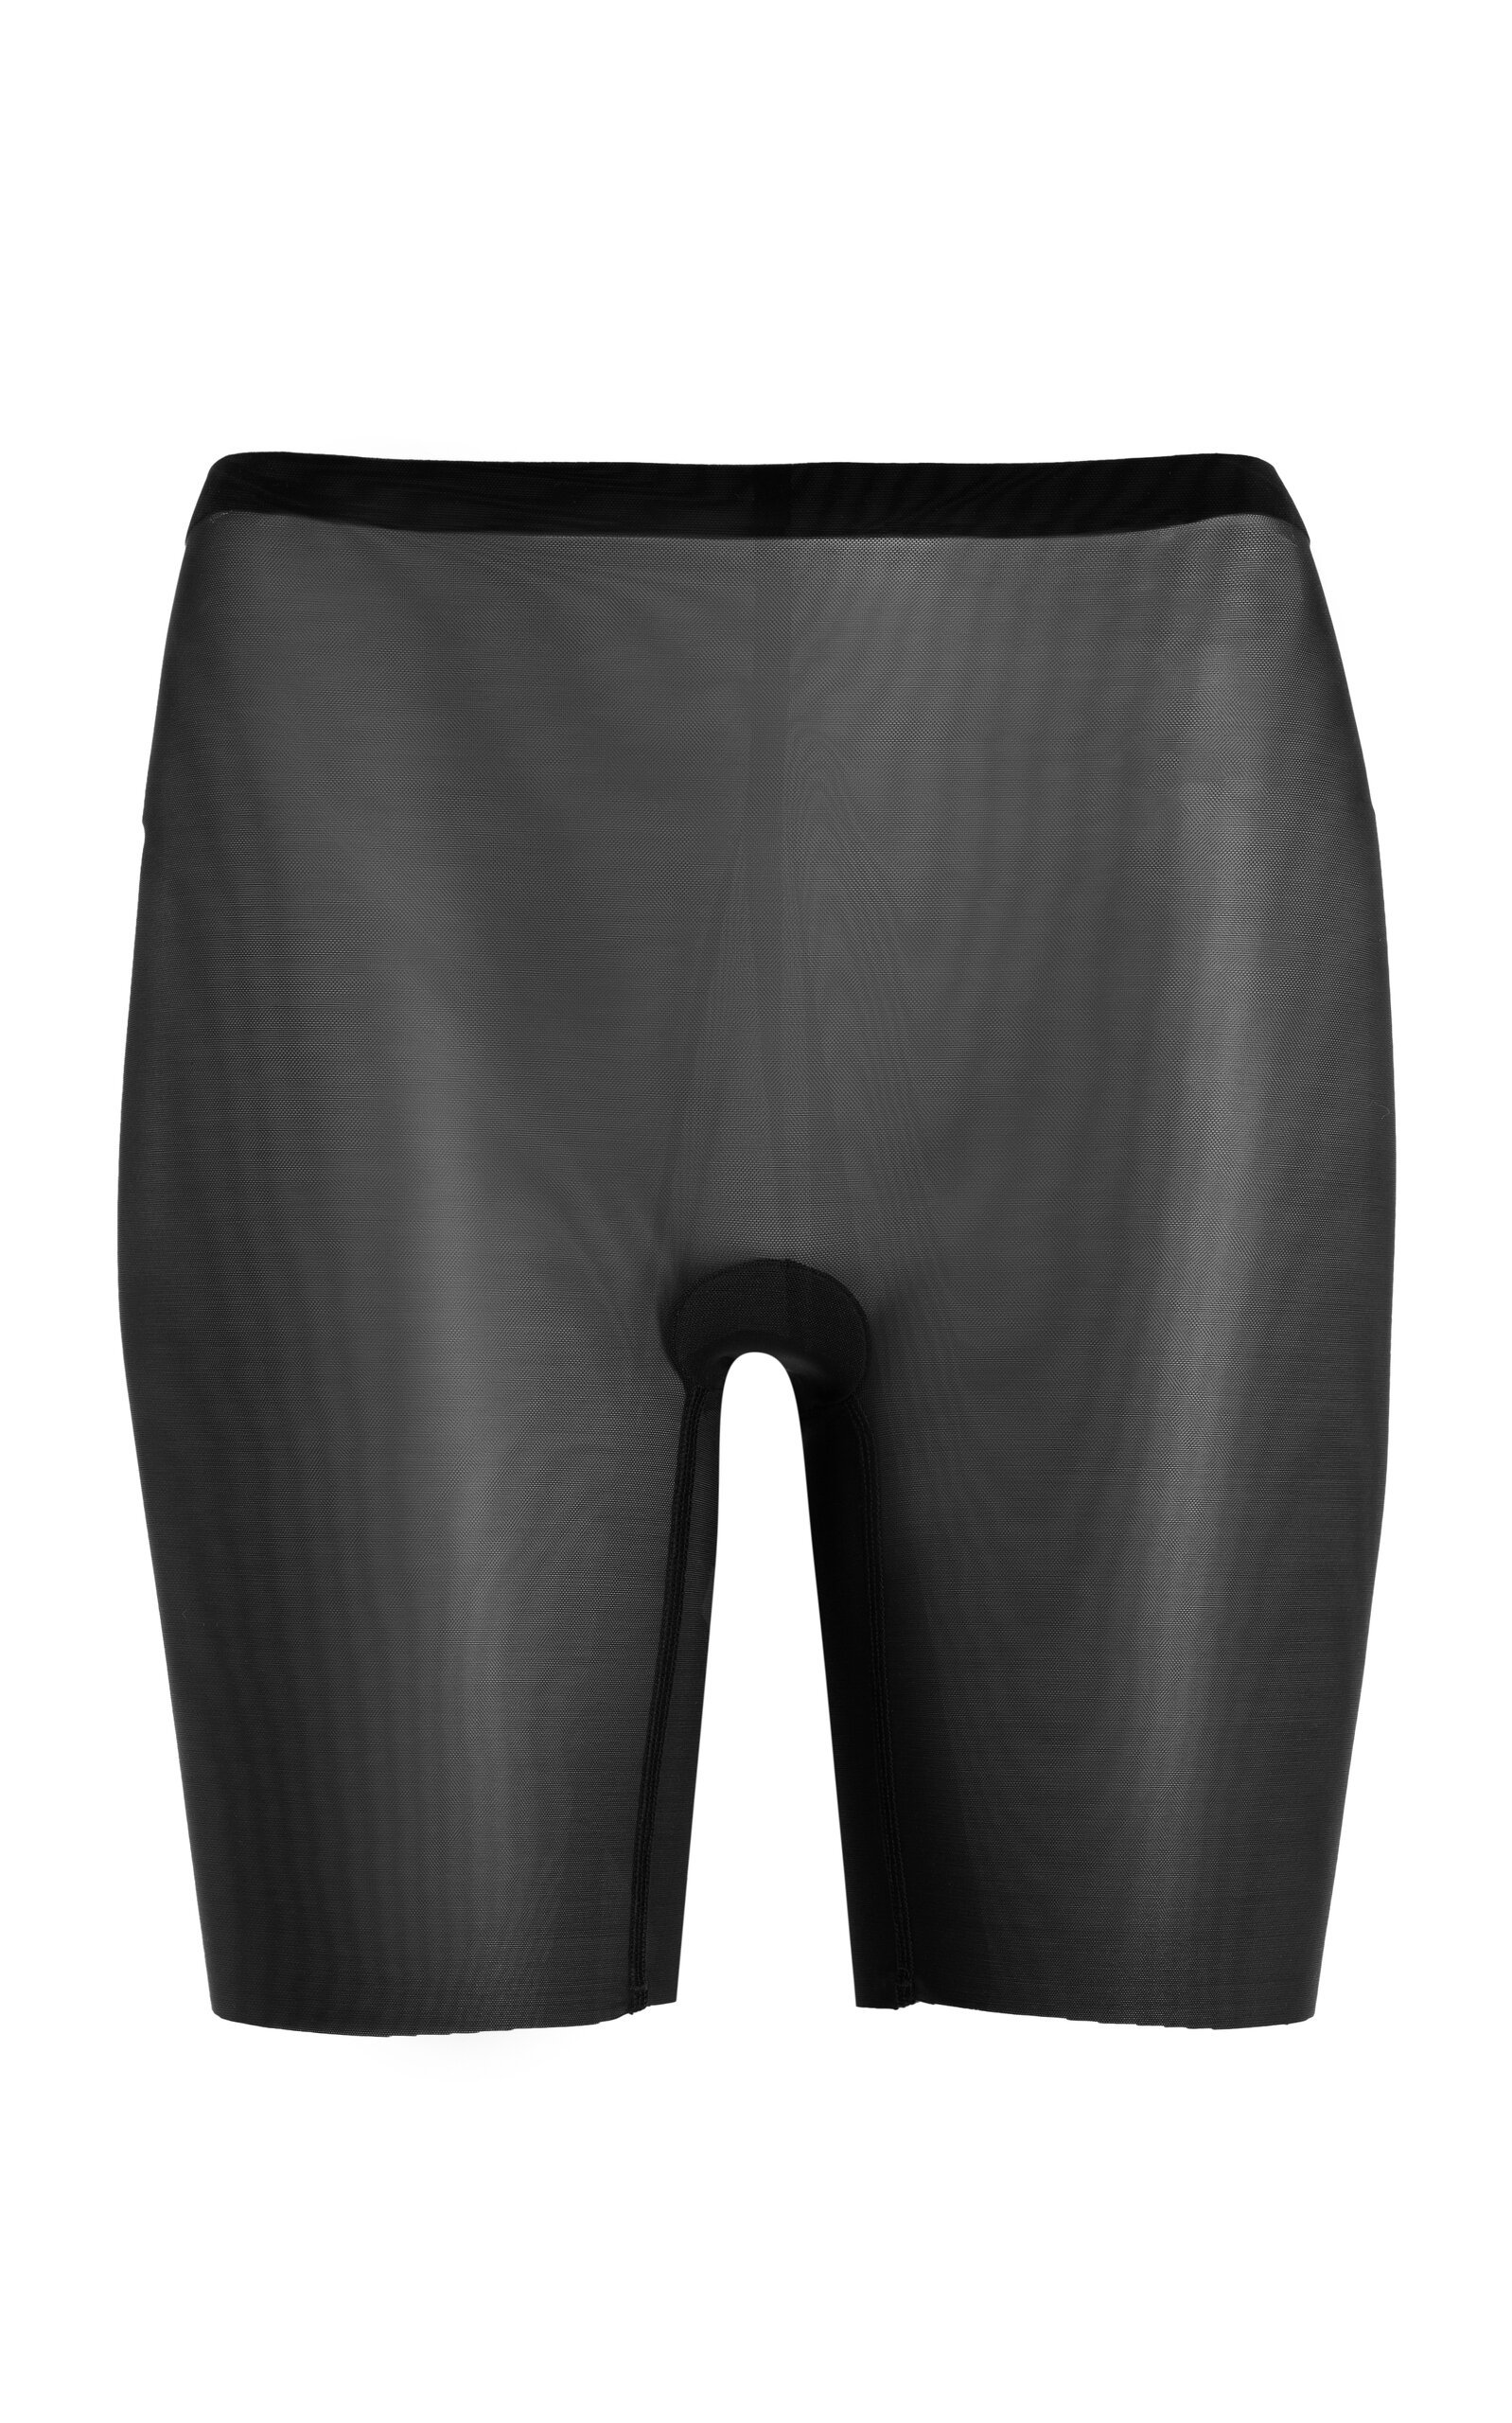 WOLFORD CONTROL SHORTS